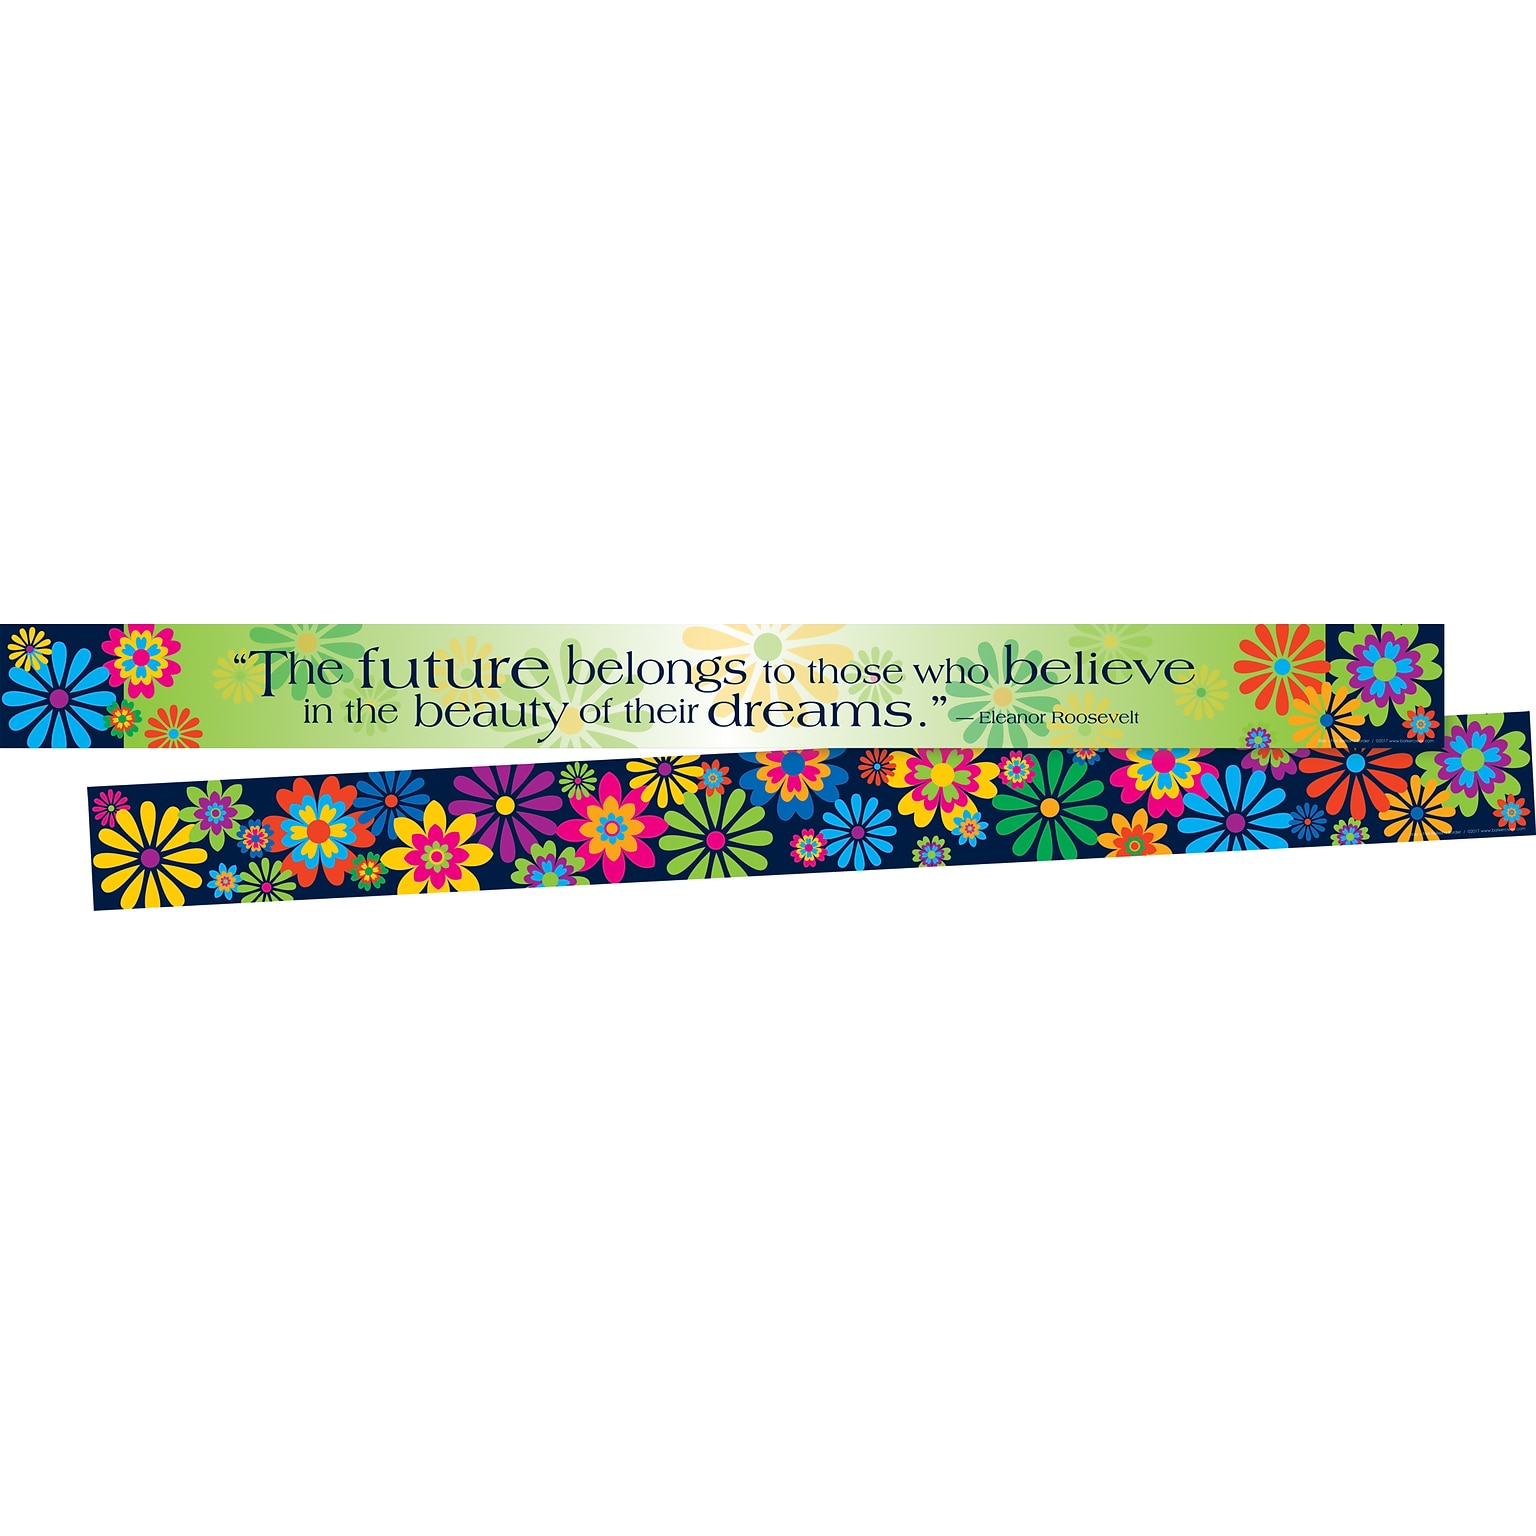 Barker Creek Italy - Fiori Bellissimi Double Sided Border, 3 x 35, 12/Pack (LL959)